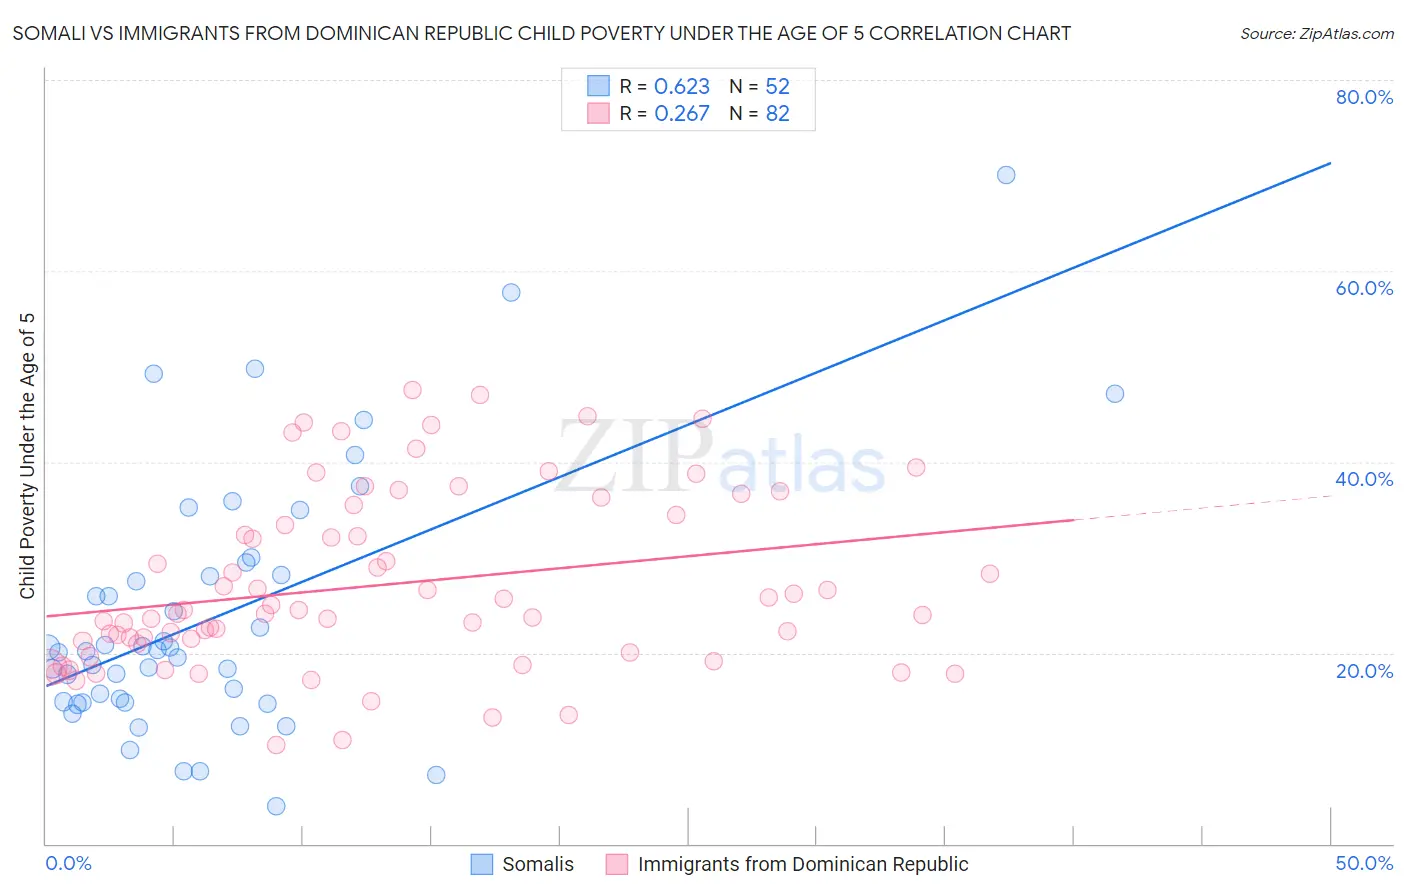 Somali vs Immigrants from Dominican Republic Child Poverty Under the Age of 5